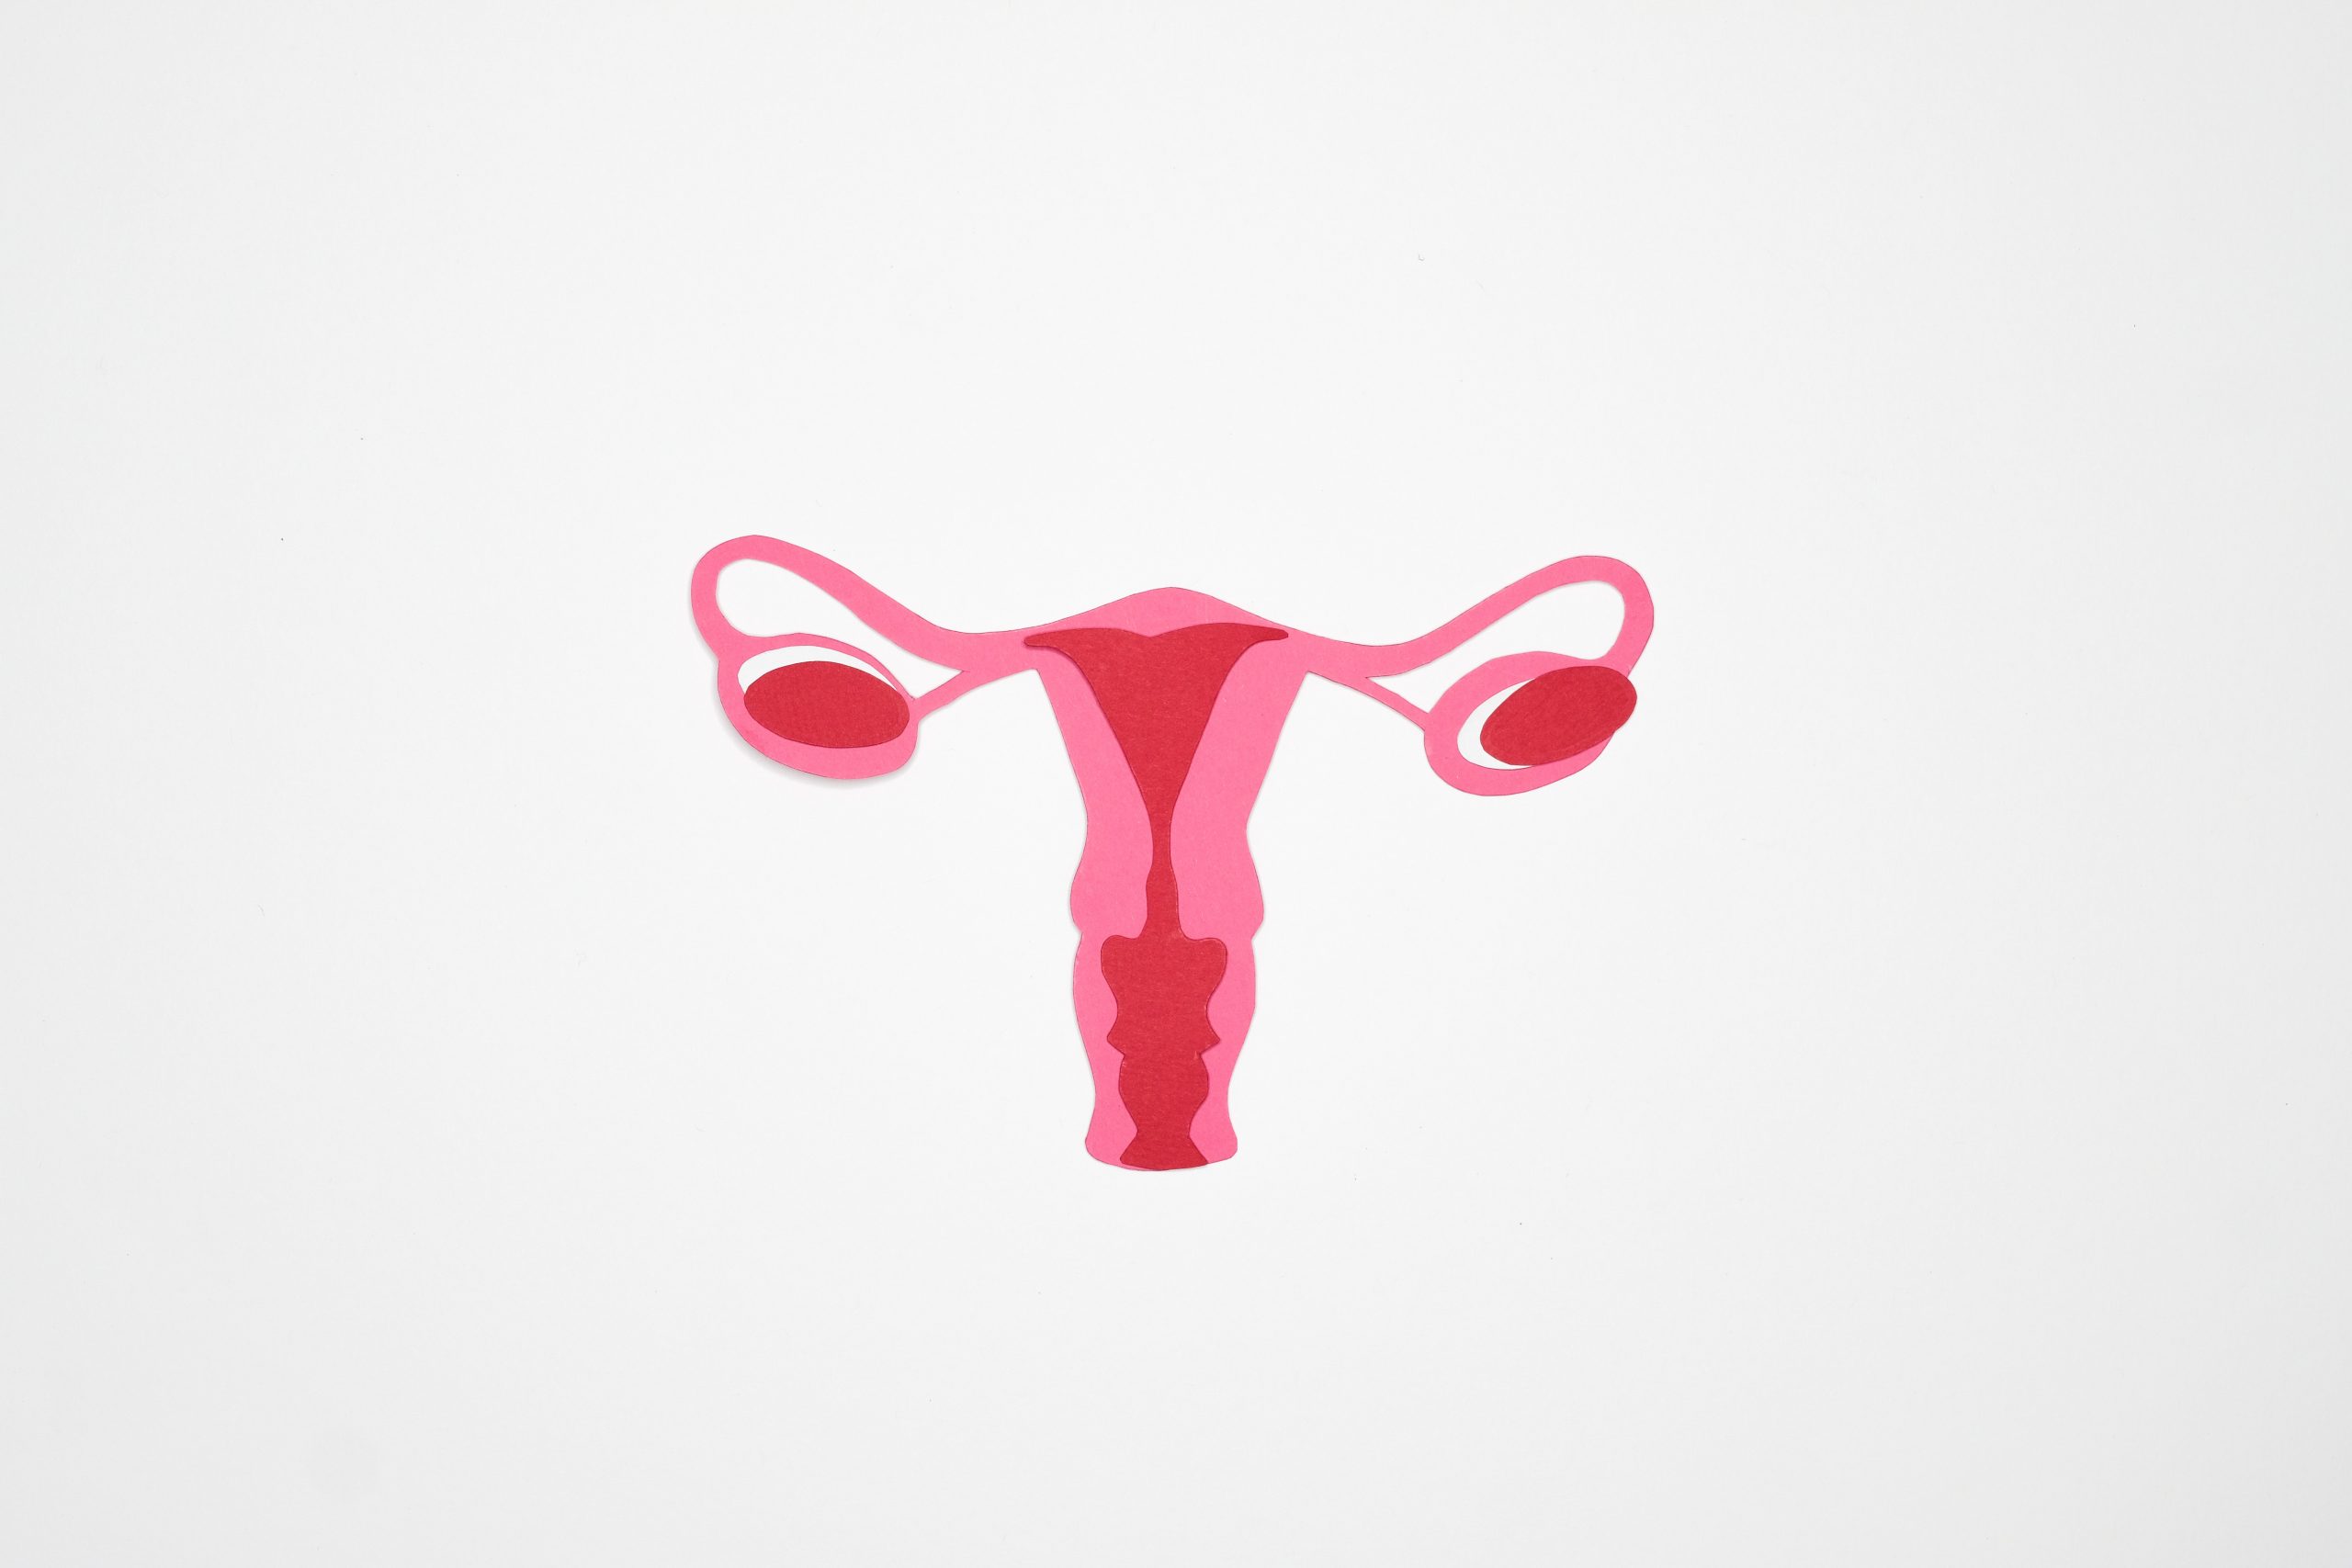 womens-health-5-reasons-why-your-period-is-heavy